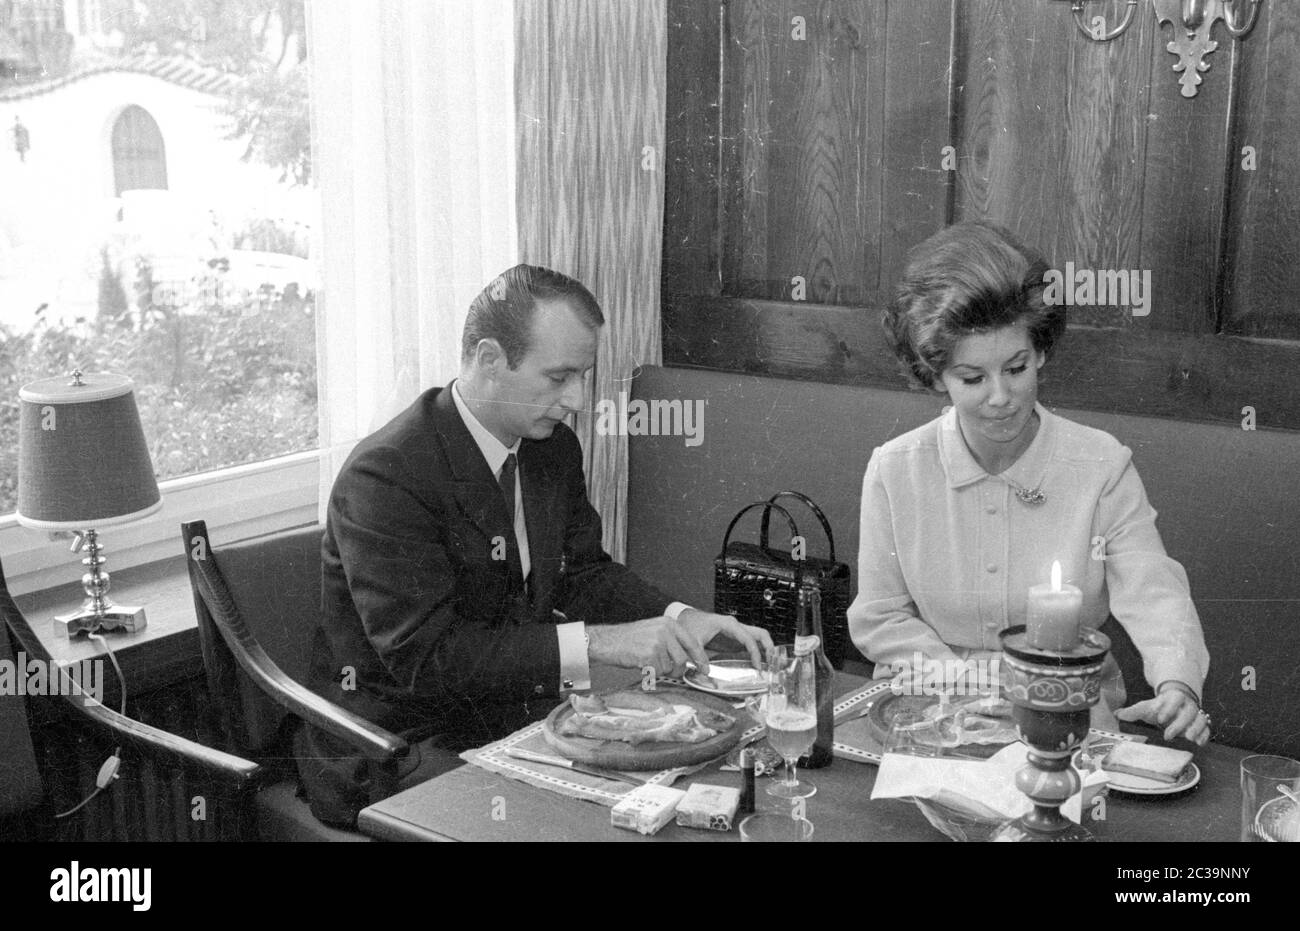 Prince Michael of Prussia with his future wife Jutta at the Hotel Alpina in Garmisch in 1966. Stock Photo